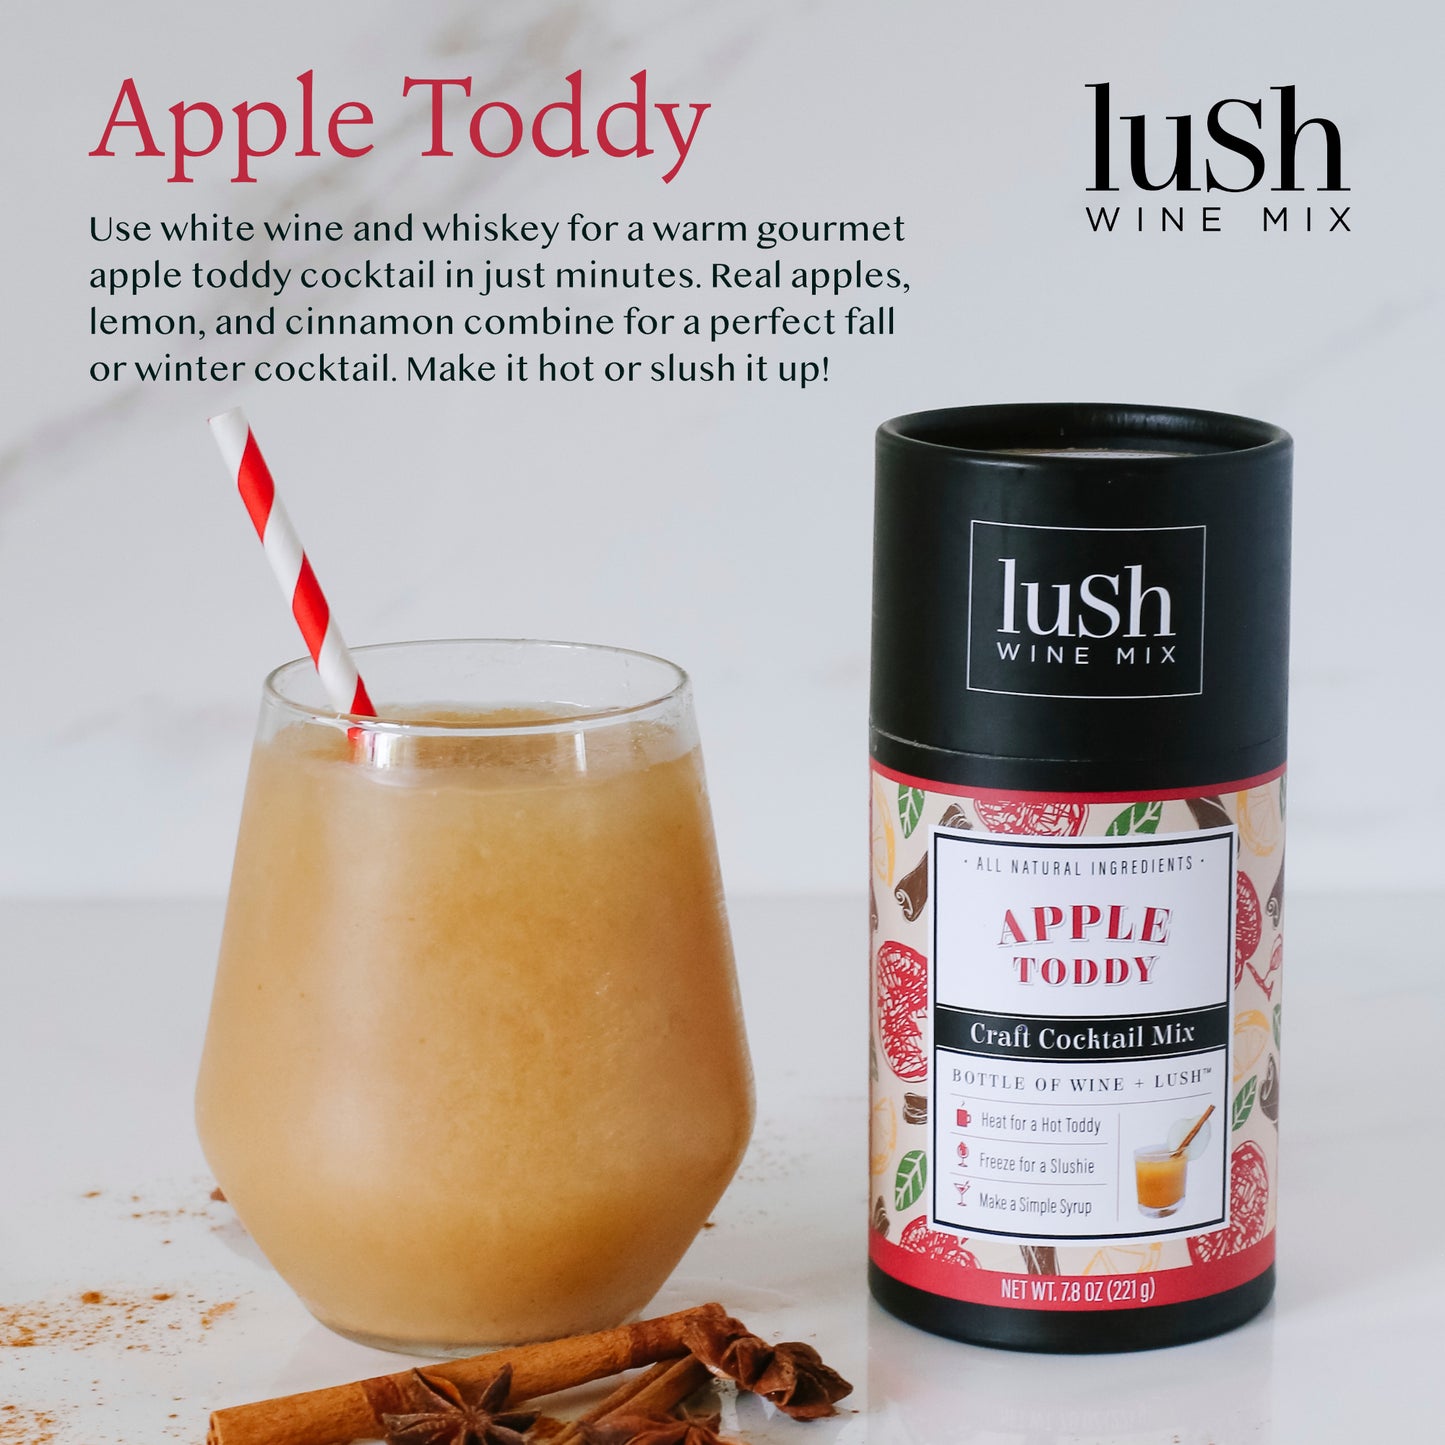 Apple Toddy Casepack - 50 Units